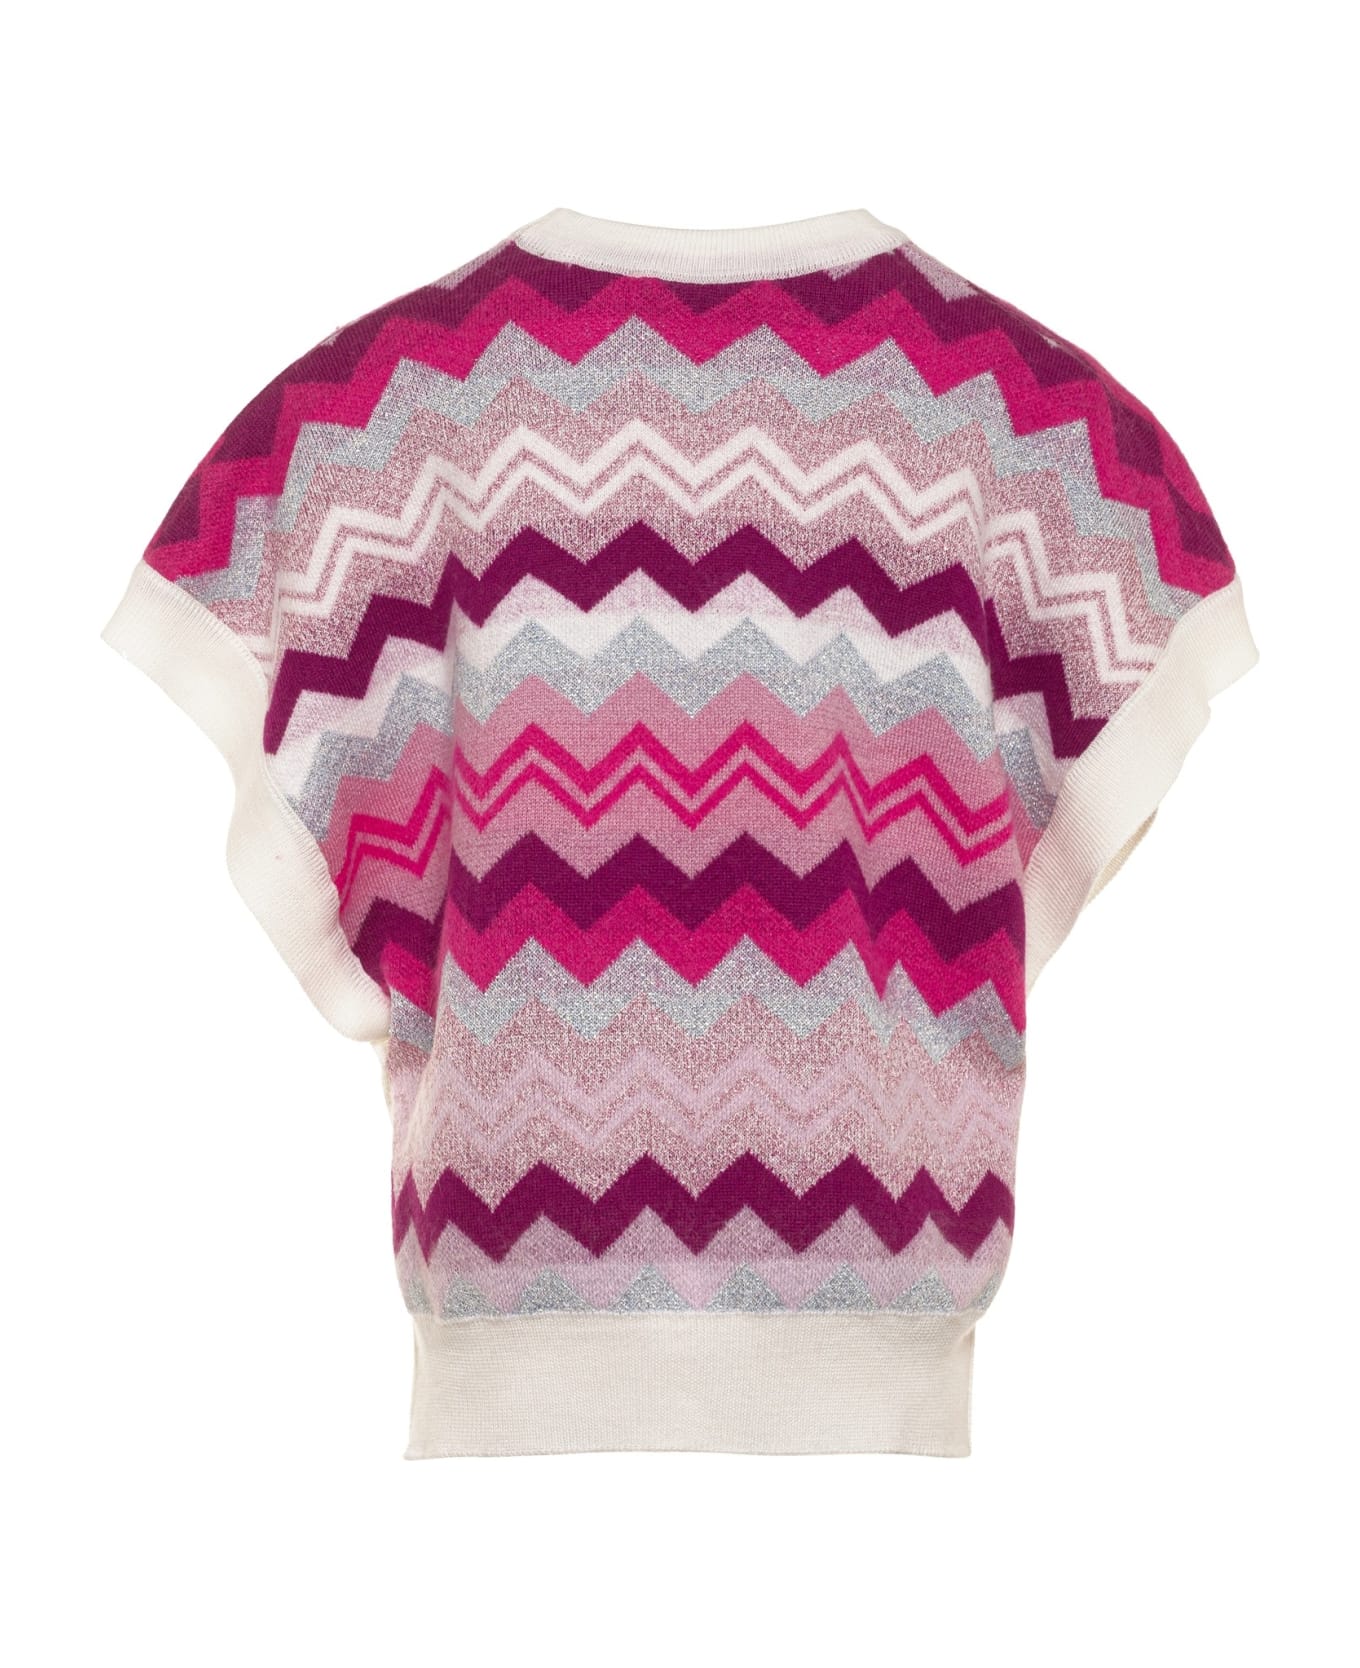 Missoni Kids Knitted Dress - Multicolor